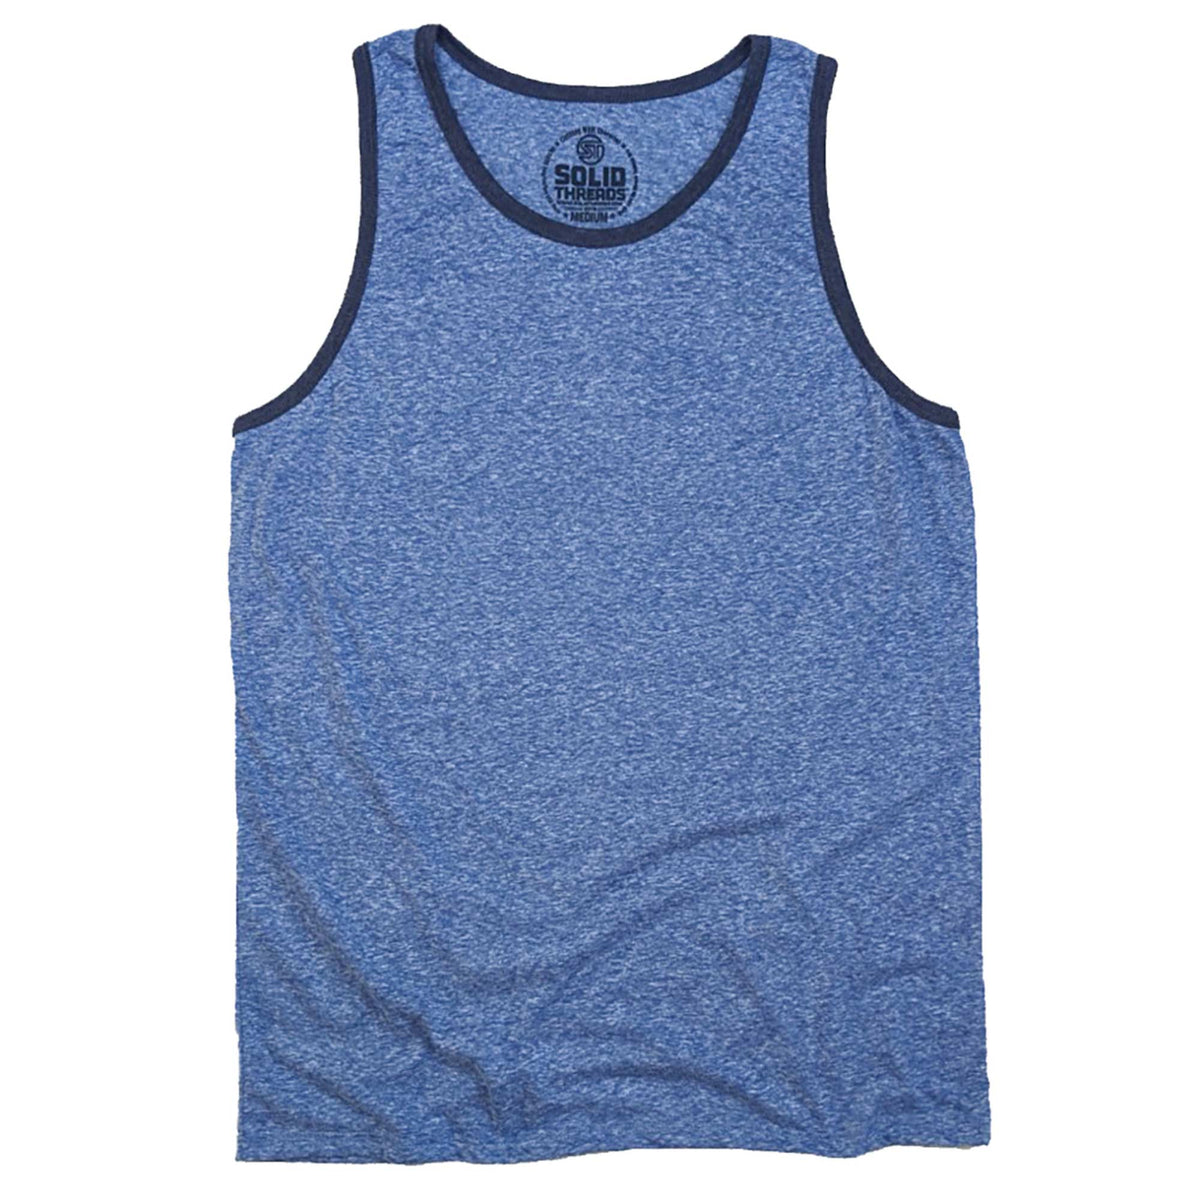 Men's Solid Threads Retro Ringer Tank Top | Vintage USA Made Tee